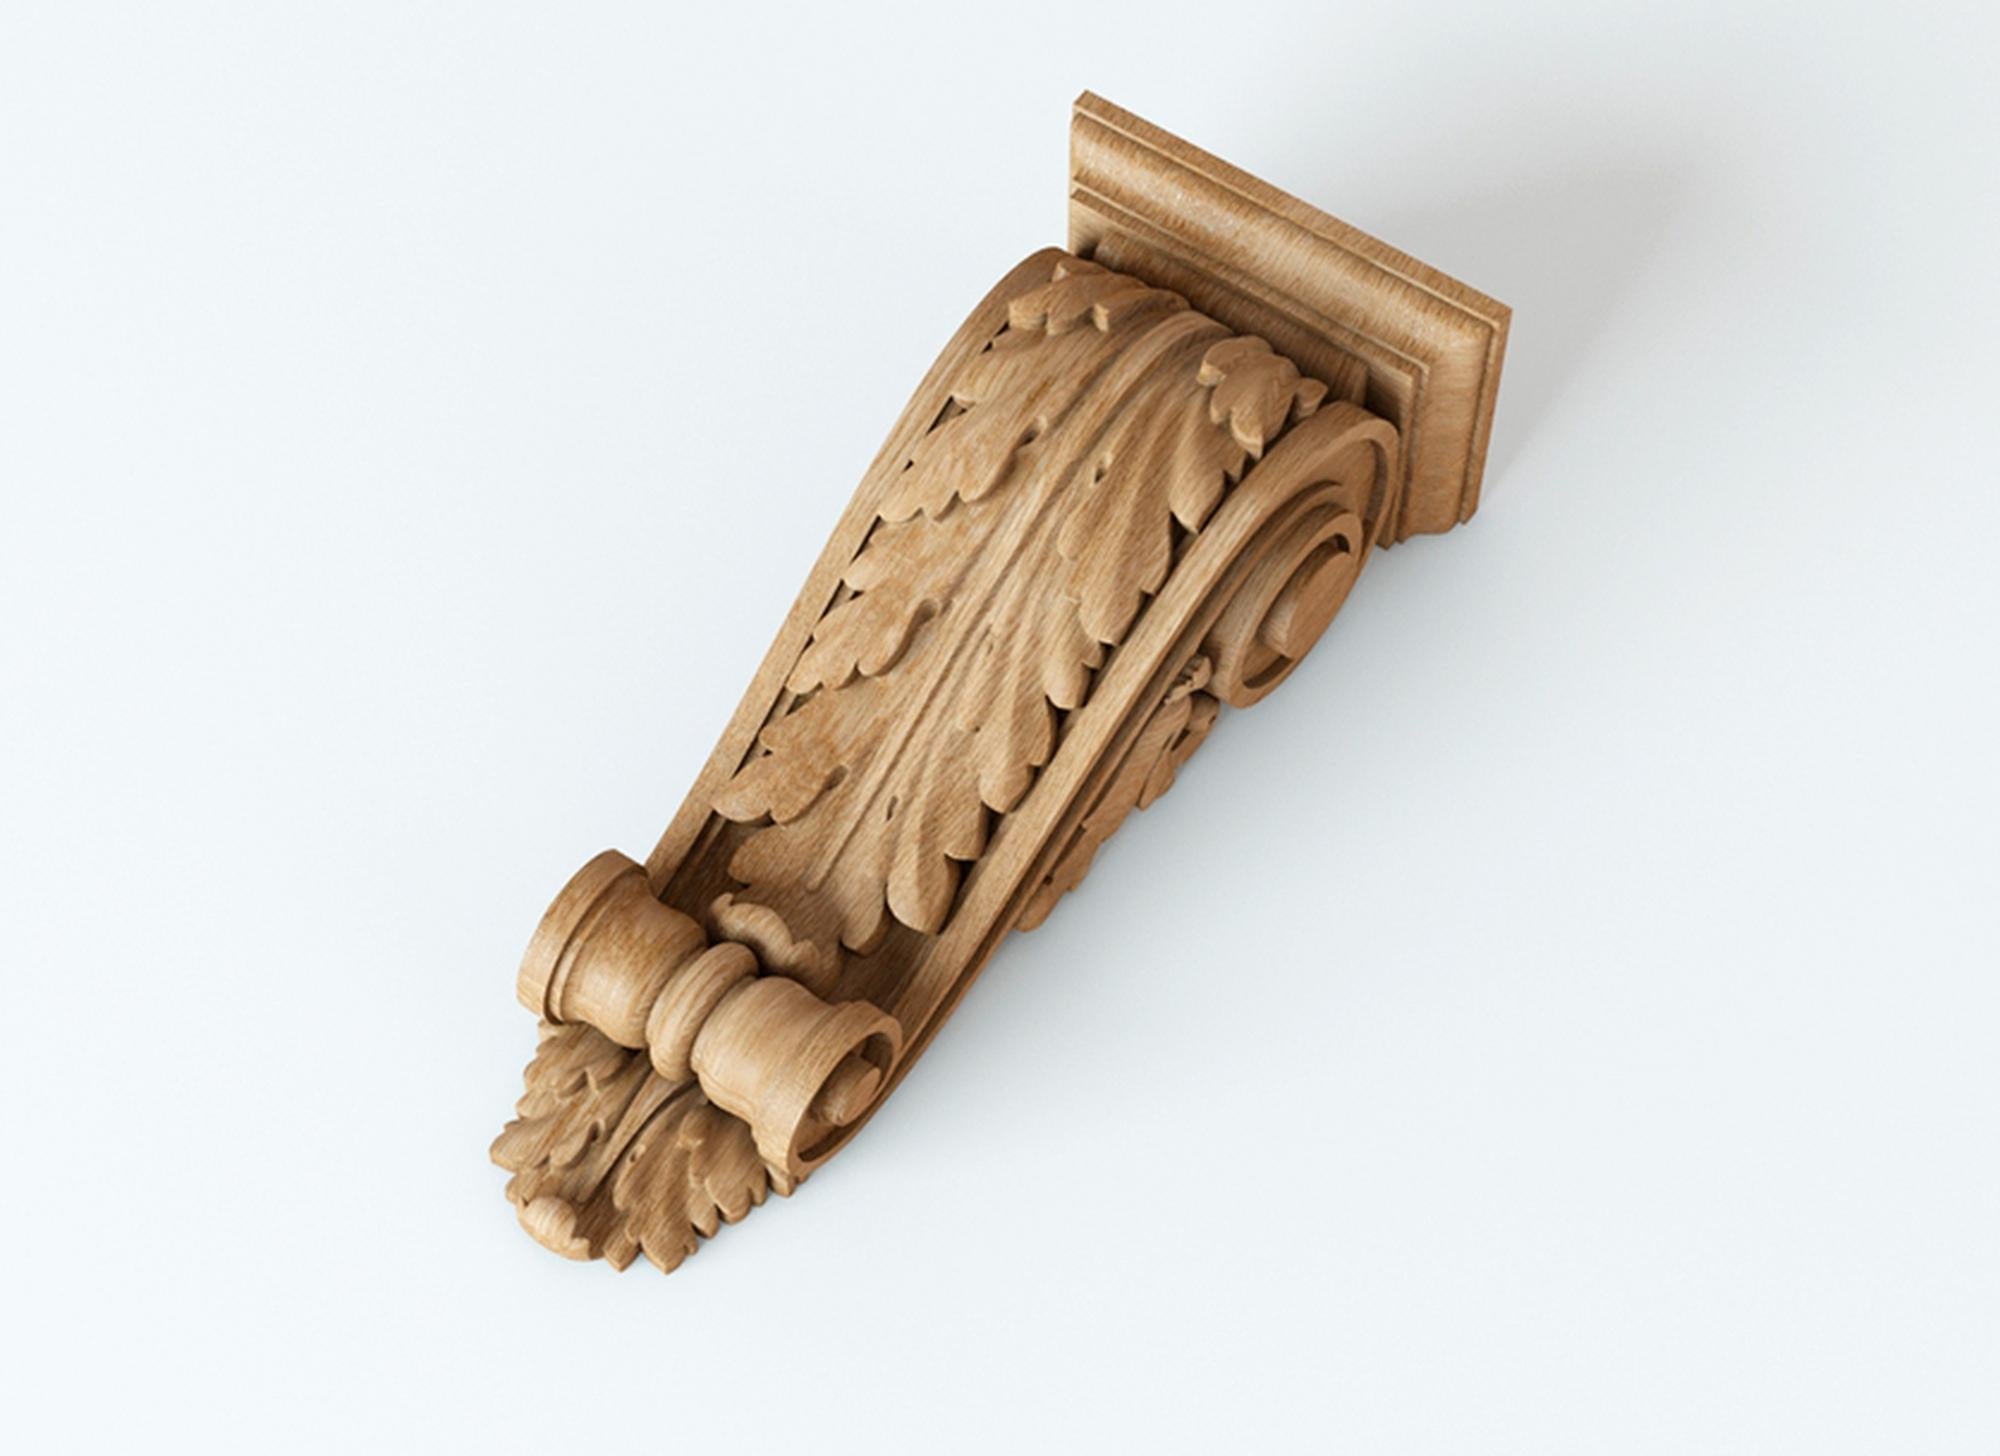 High-quality unfinished carved wooden corbel. Unpainted.

>> SKU: KR-012

>> Dimensions (A x B x C x d):

1) 7.8